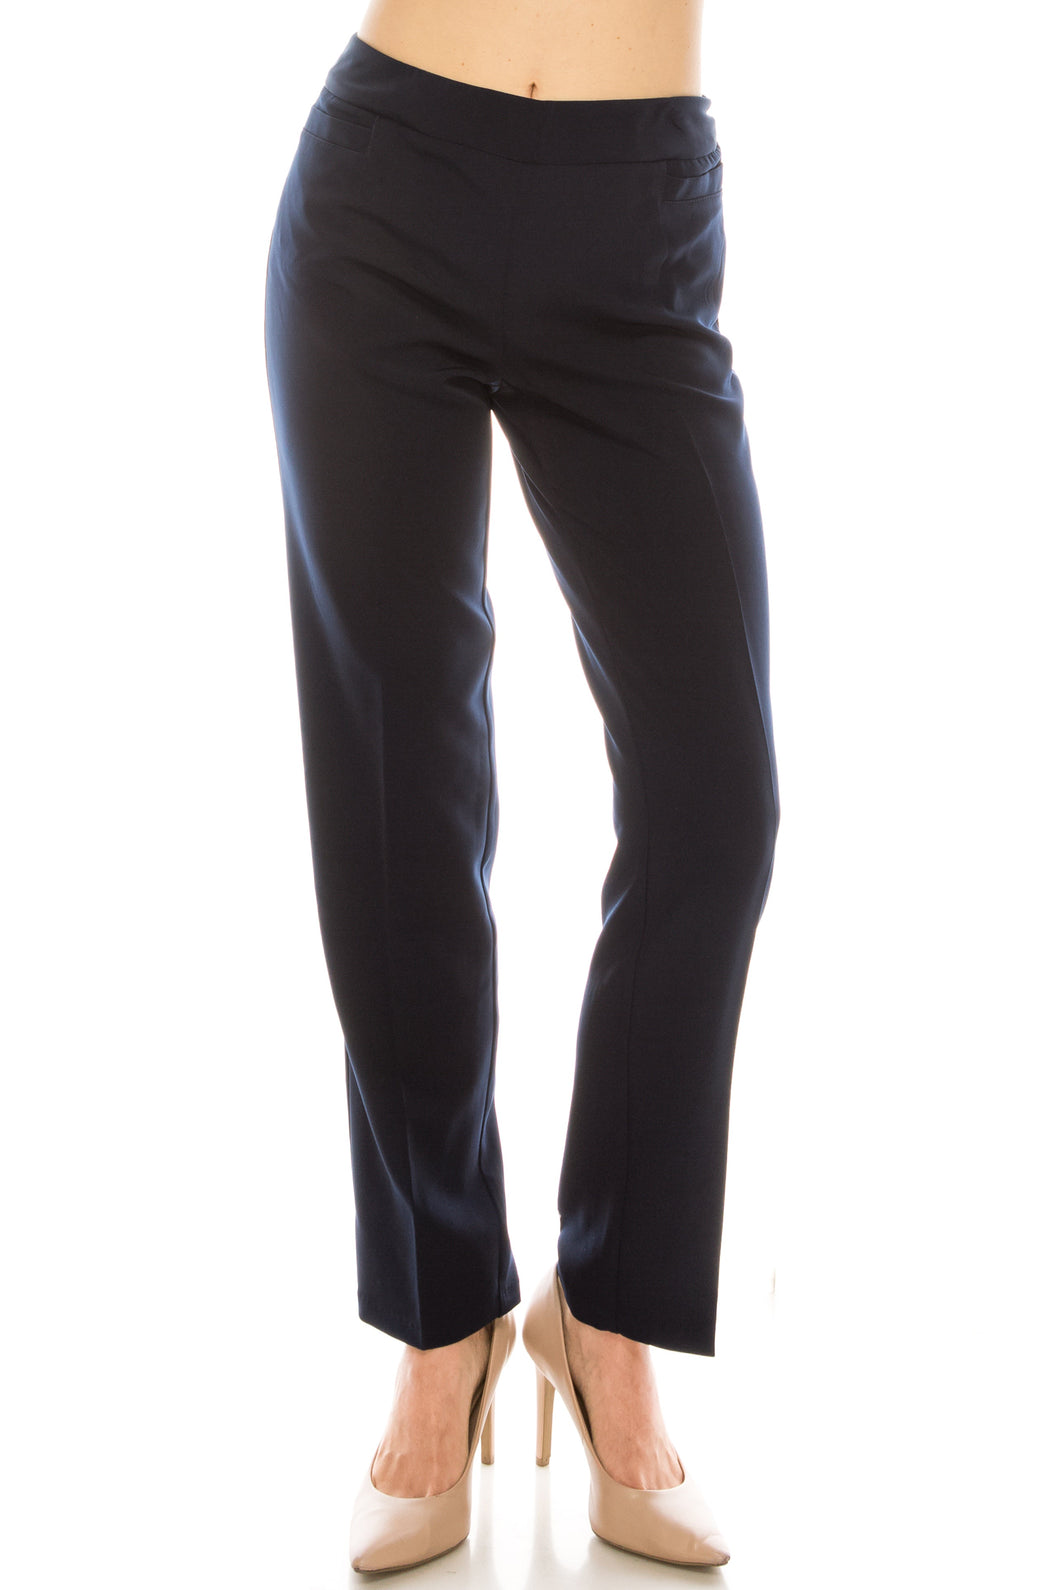 Zac & Rachel Twill Slim Pants with 2 Front Functional Pockets